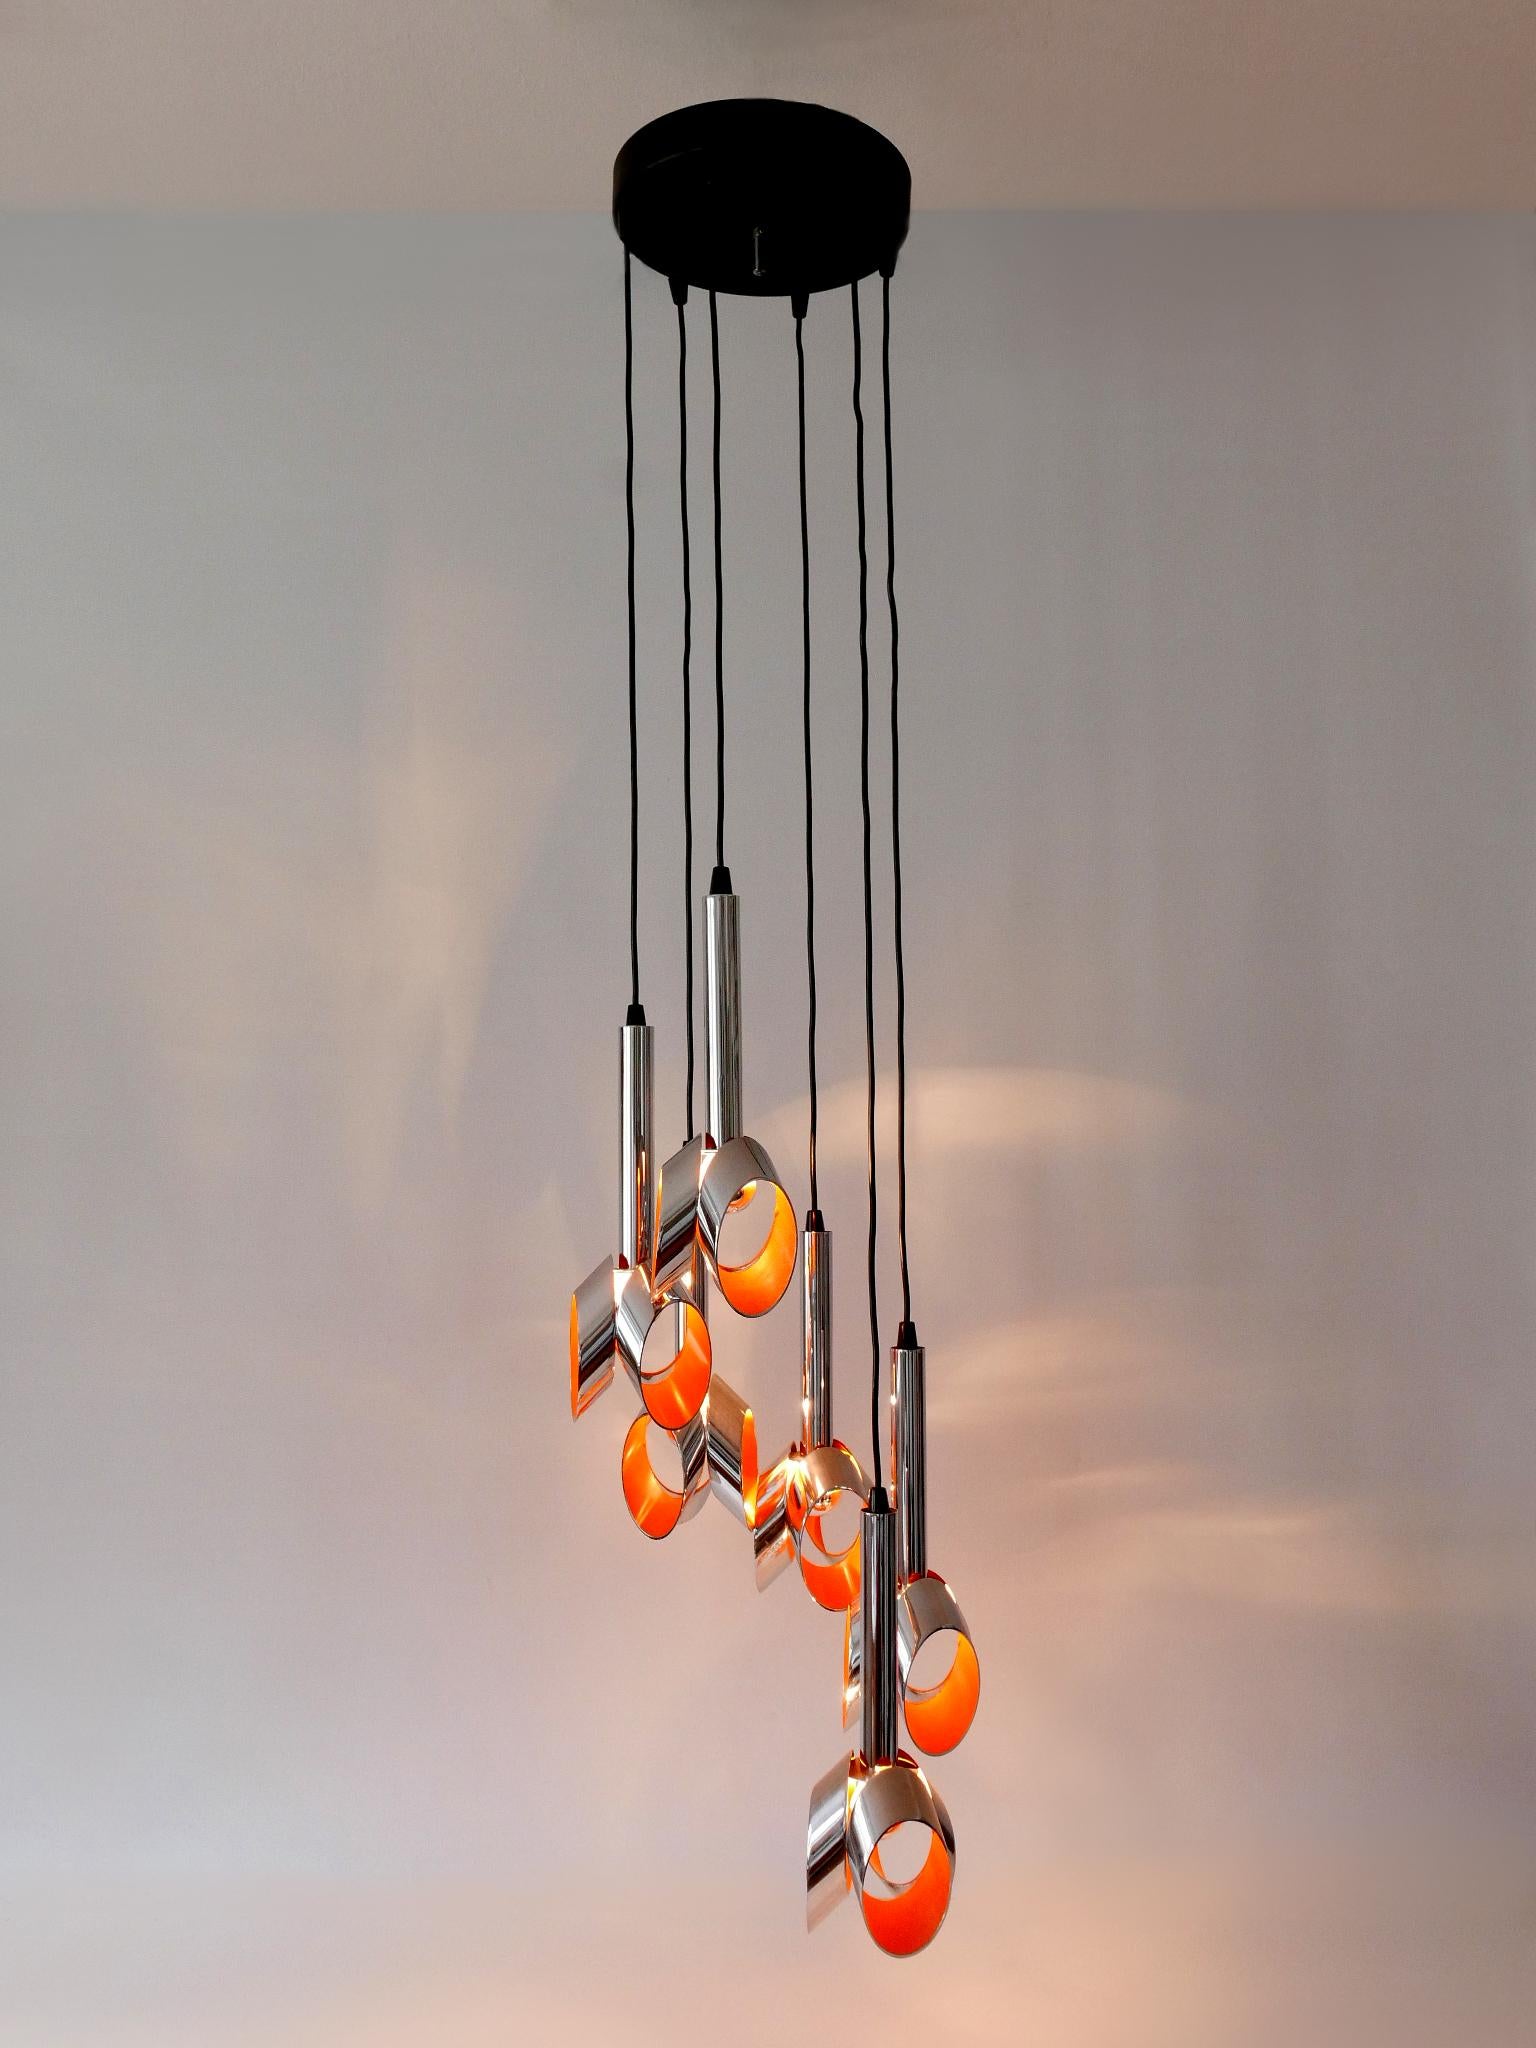 Extremely rare, lovely and highly decorative Mid-Century Modern six-armed tulip chandelier or pendant lamp. Designed and manufactured probably by RAAK, the Netherlands, 1970s.

Executed in chrome-plated and enameled metal, the chandelier comes